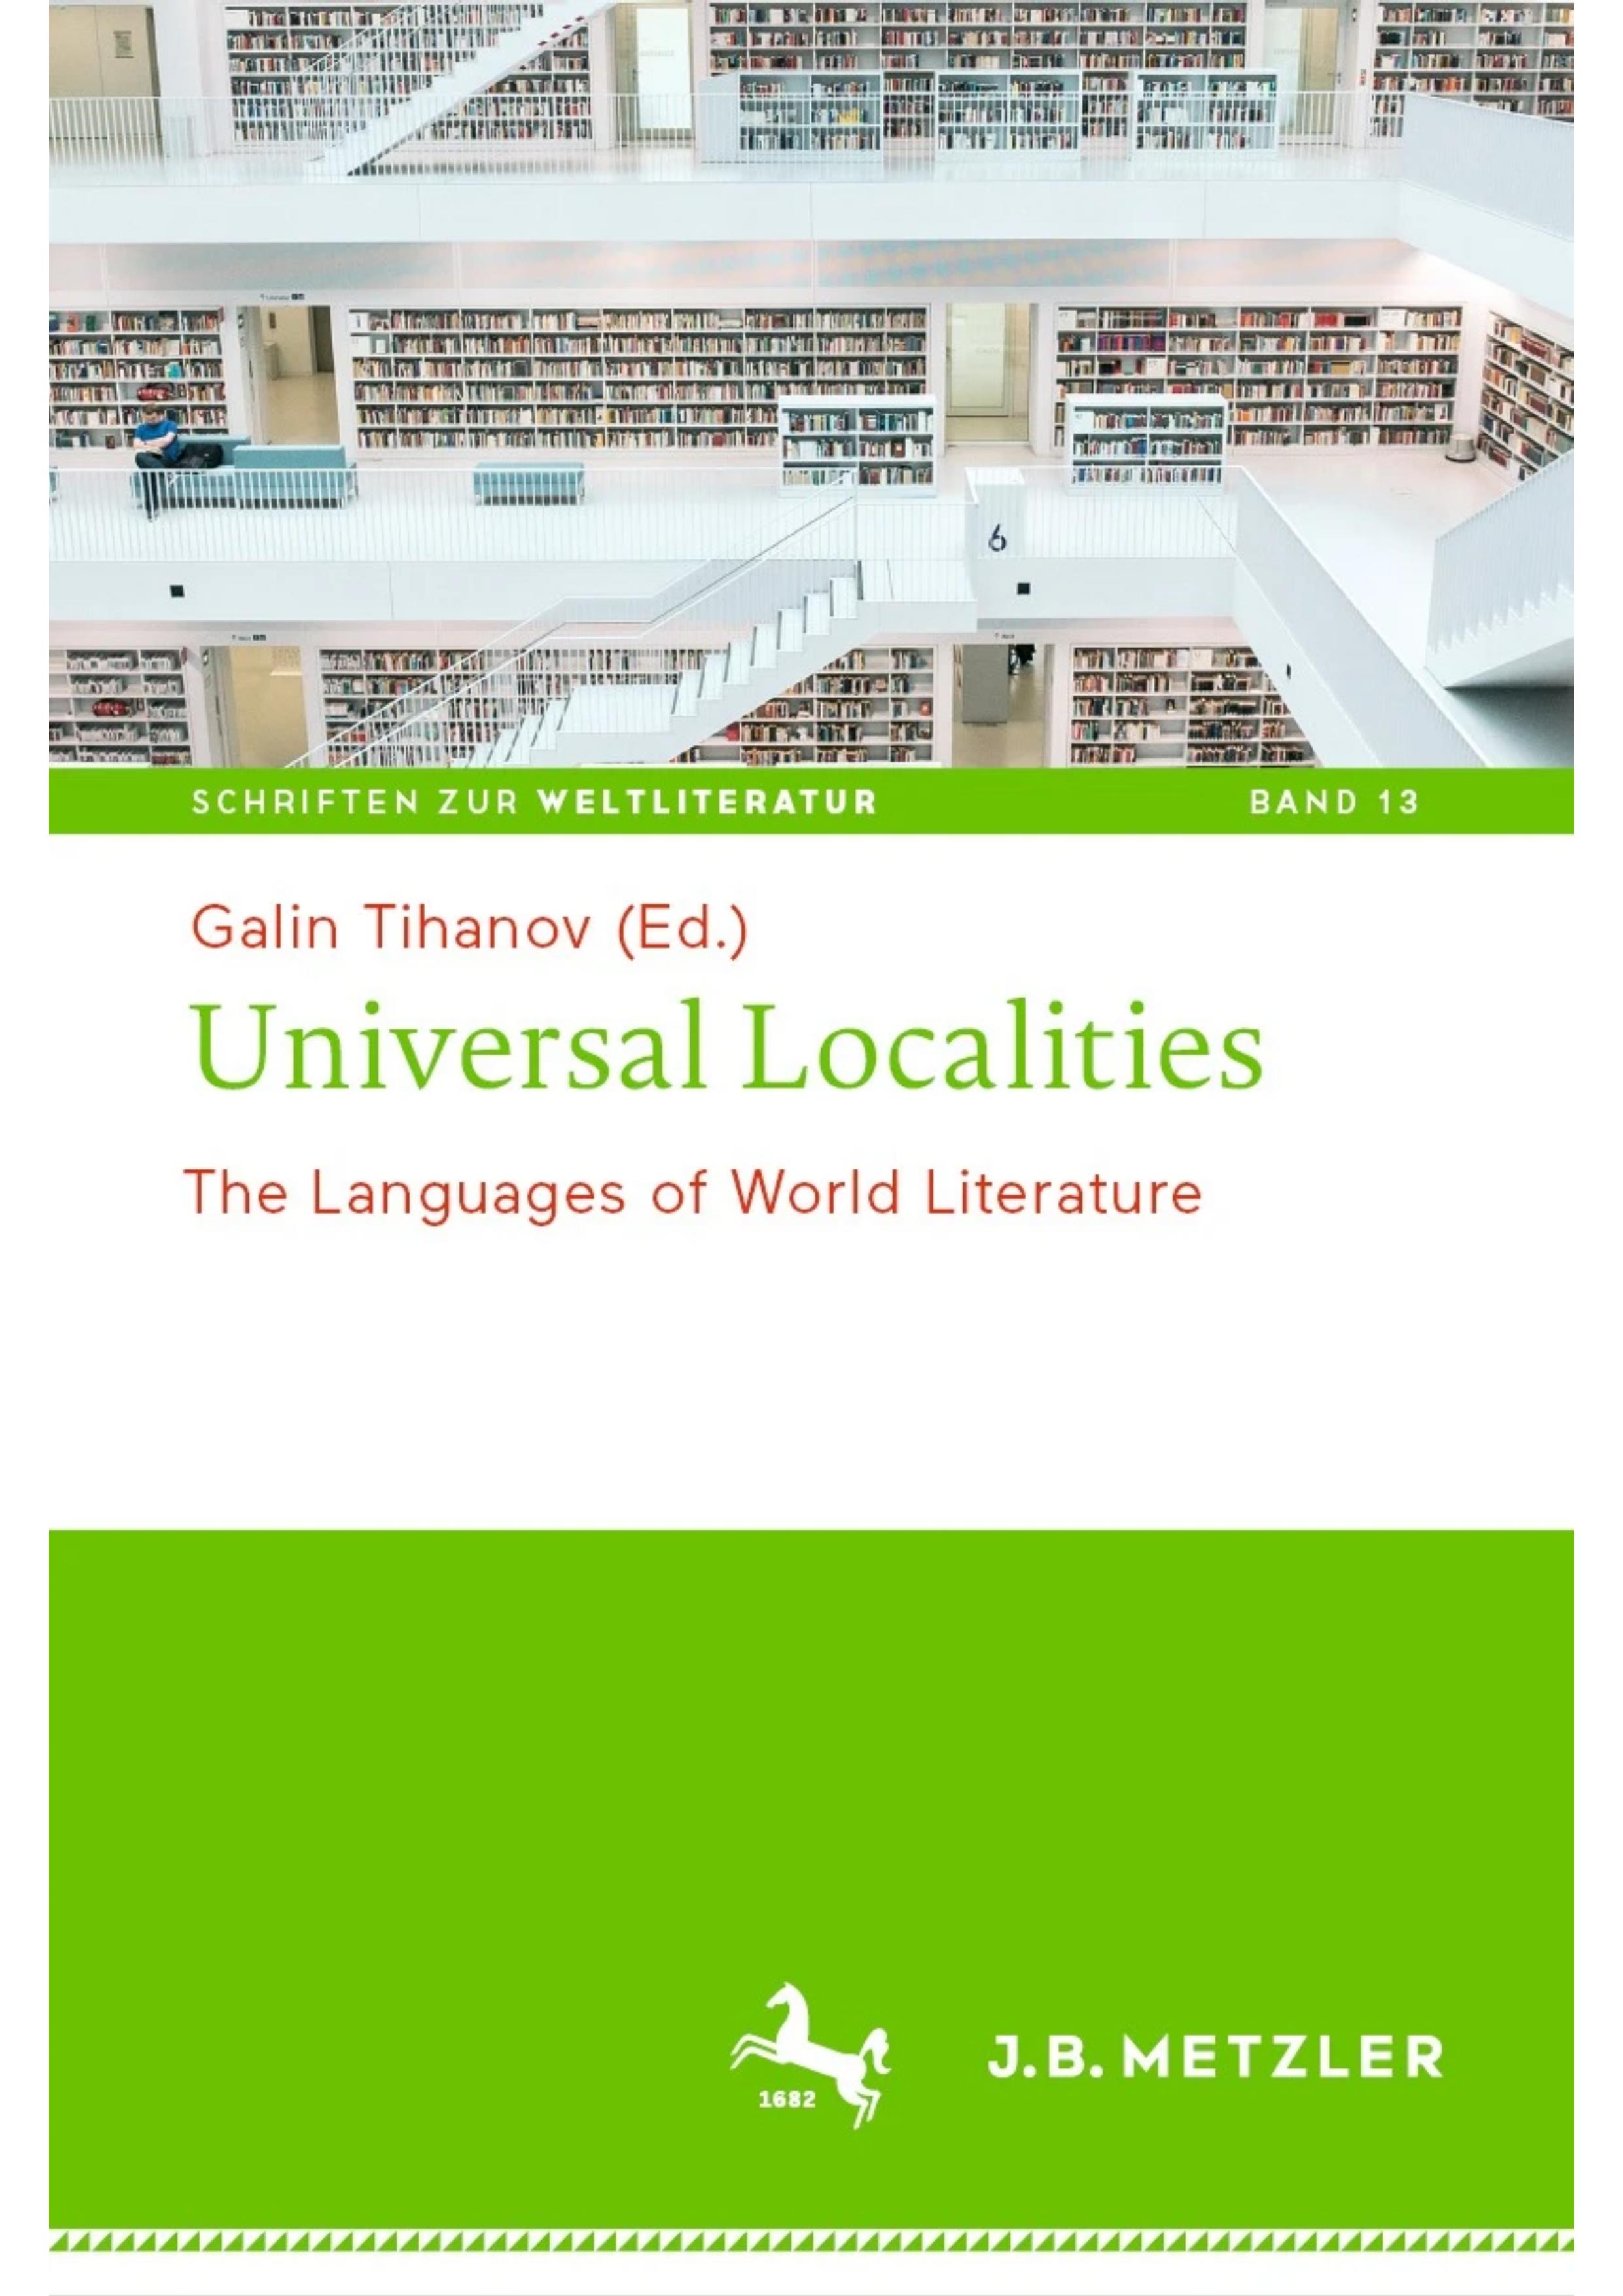 Universal Localities. The Languages of World Literature